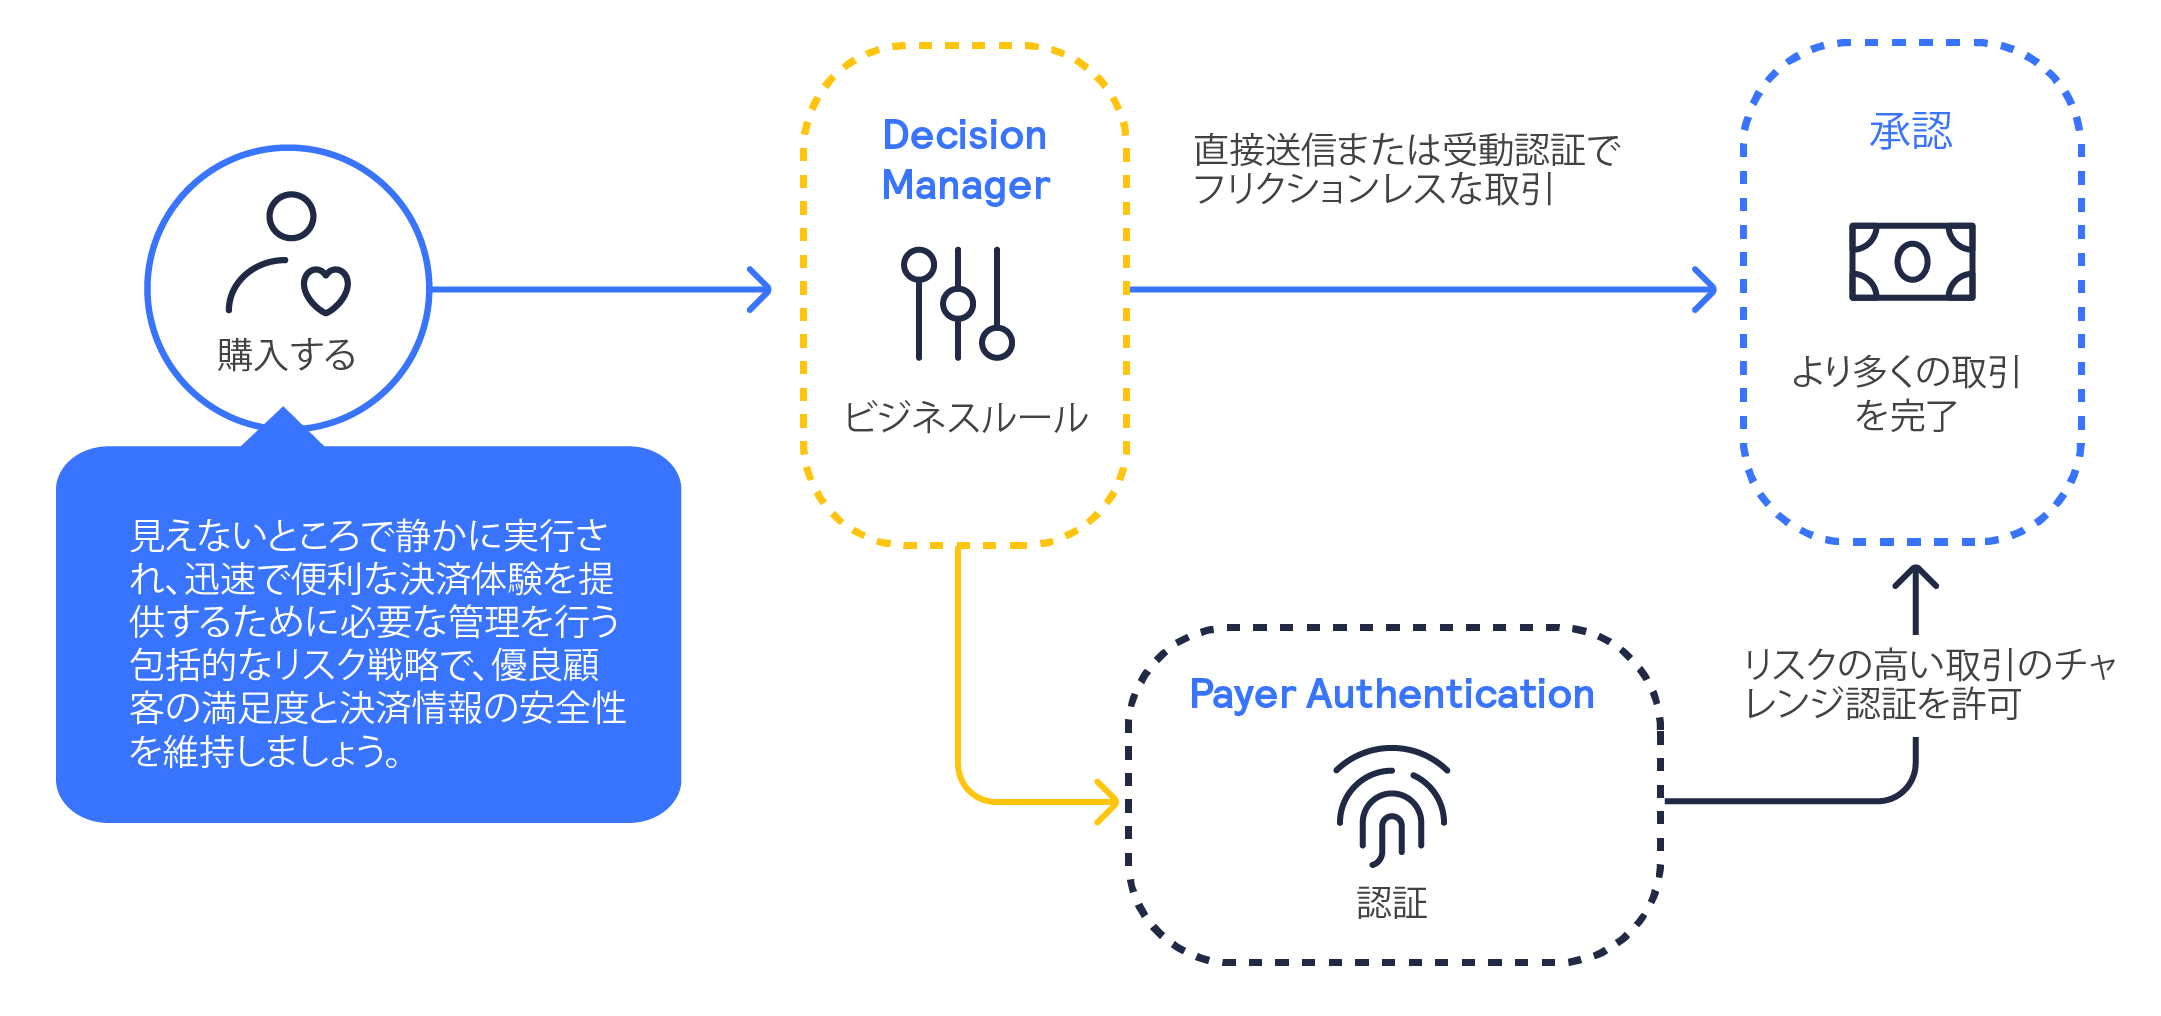 Decision Manager plus Payer Authentication（本人認証）プロセス インフォグラフィック